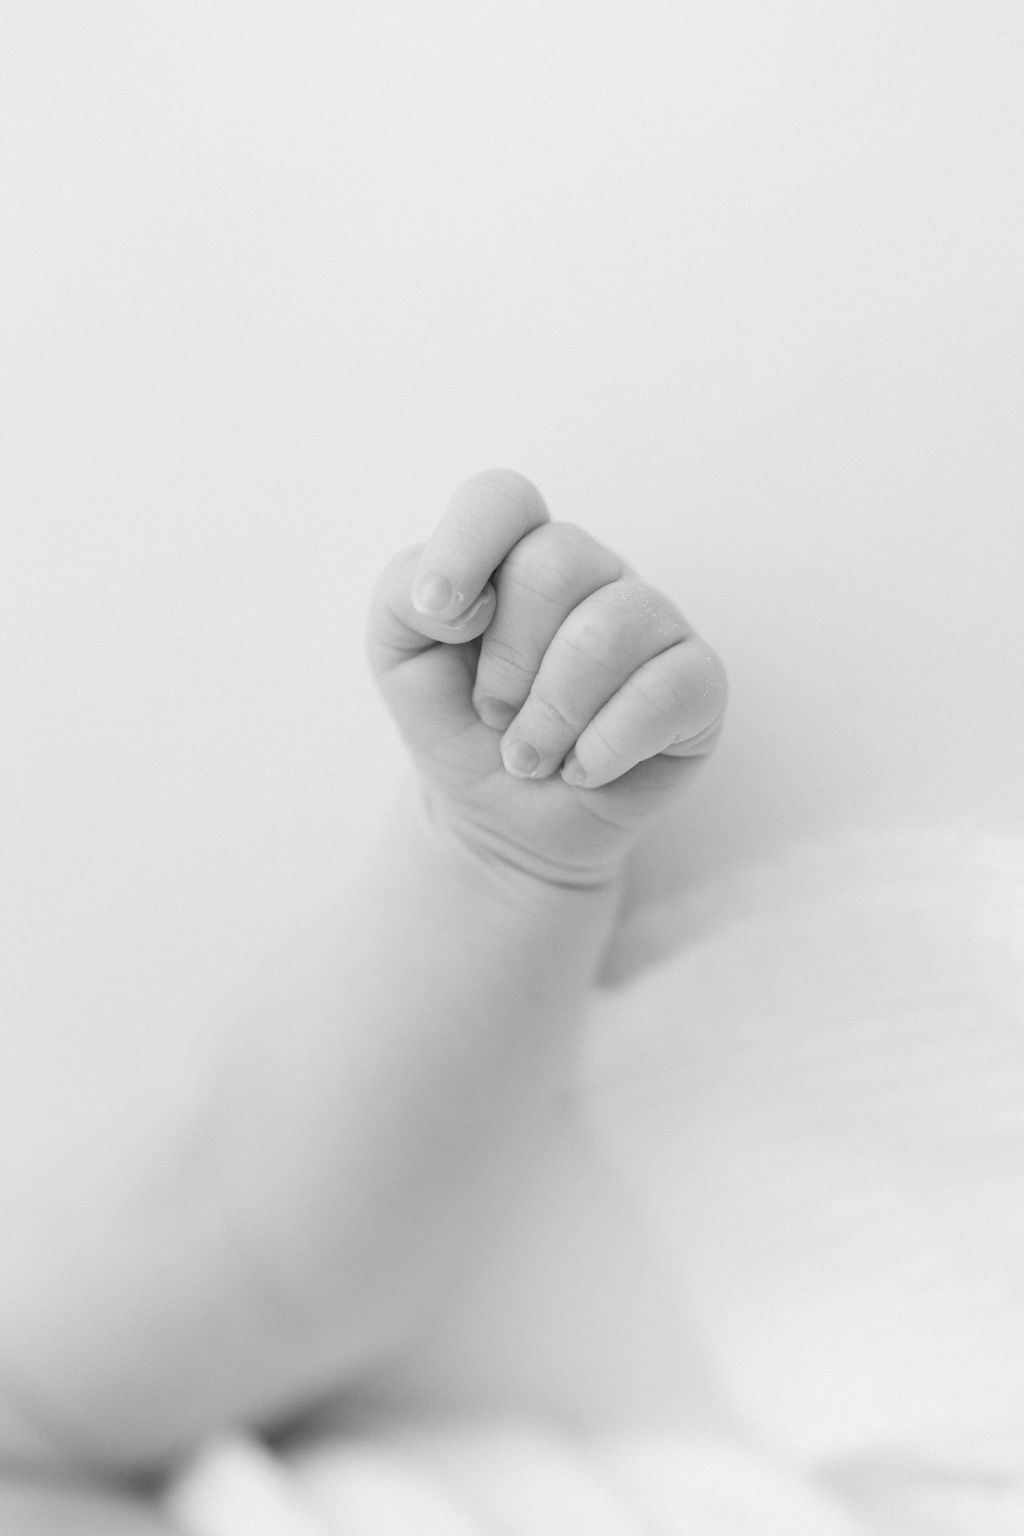 Details of a newborn baby's hand in a fist